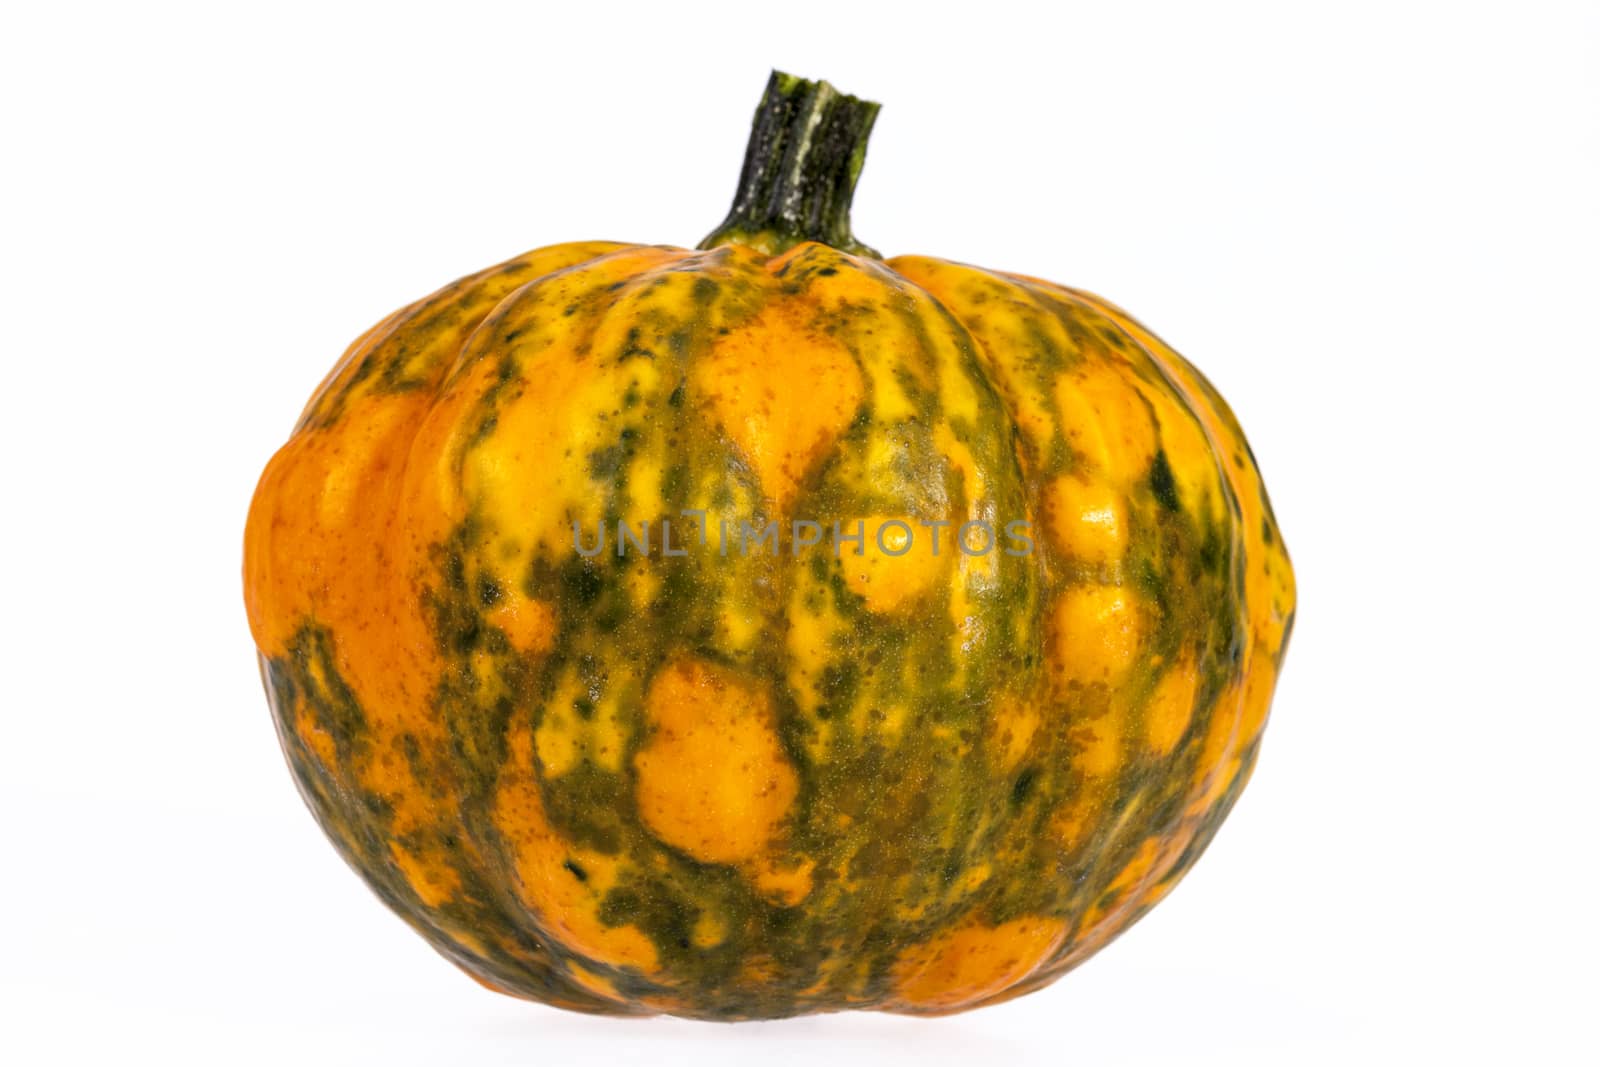 Vegetable of pumpkin decorative isolated on white background by mychadre77